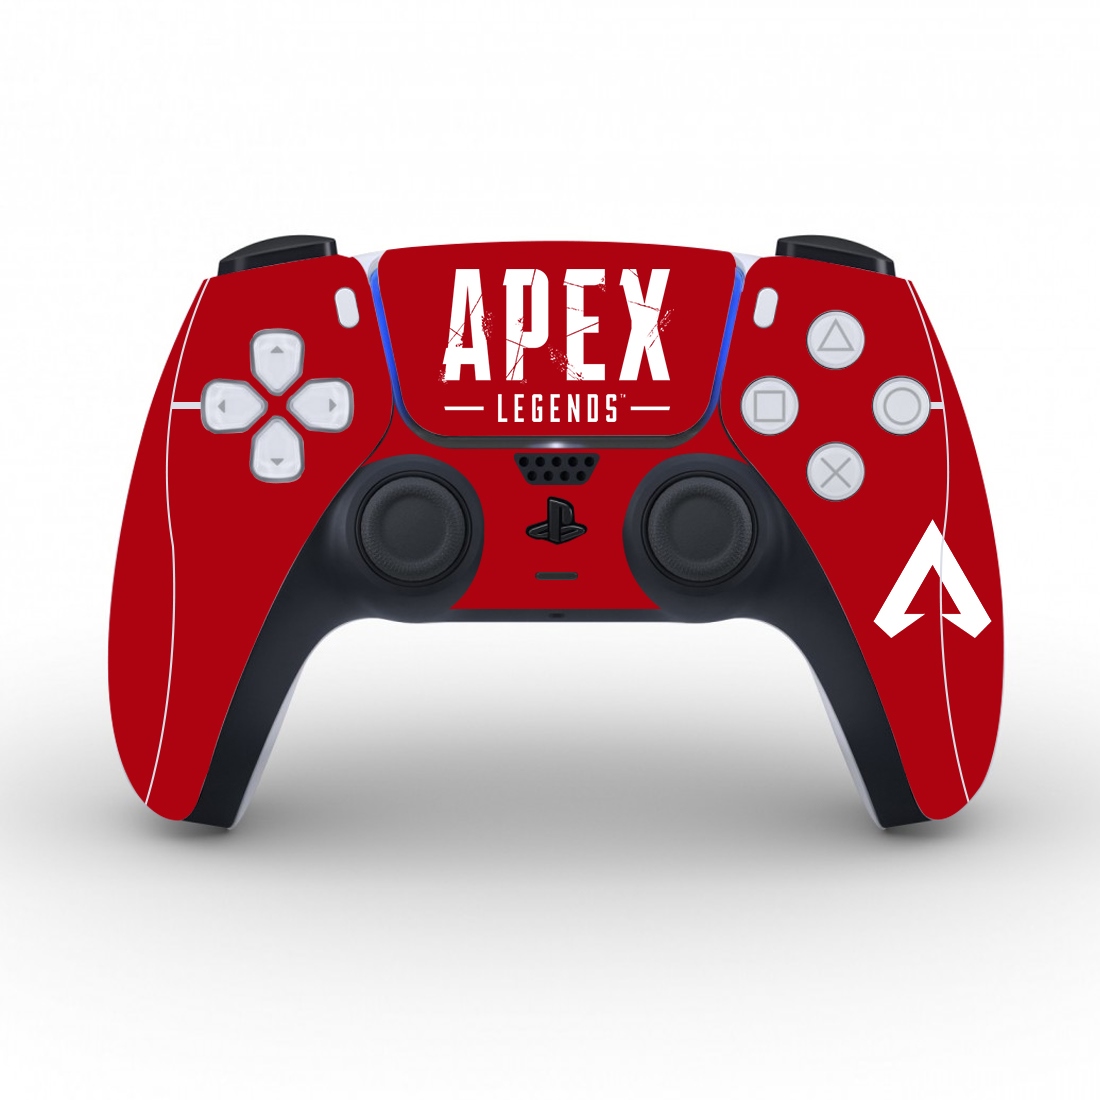 Apex Legends Protective Cover Sticker For PS5 Controller Gamepad Joystick Skin For Playstation 5 Decal PS5 Skin Sticker Vinyl